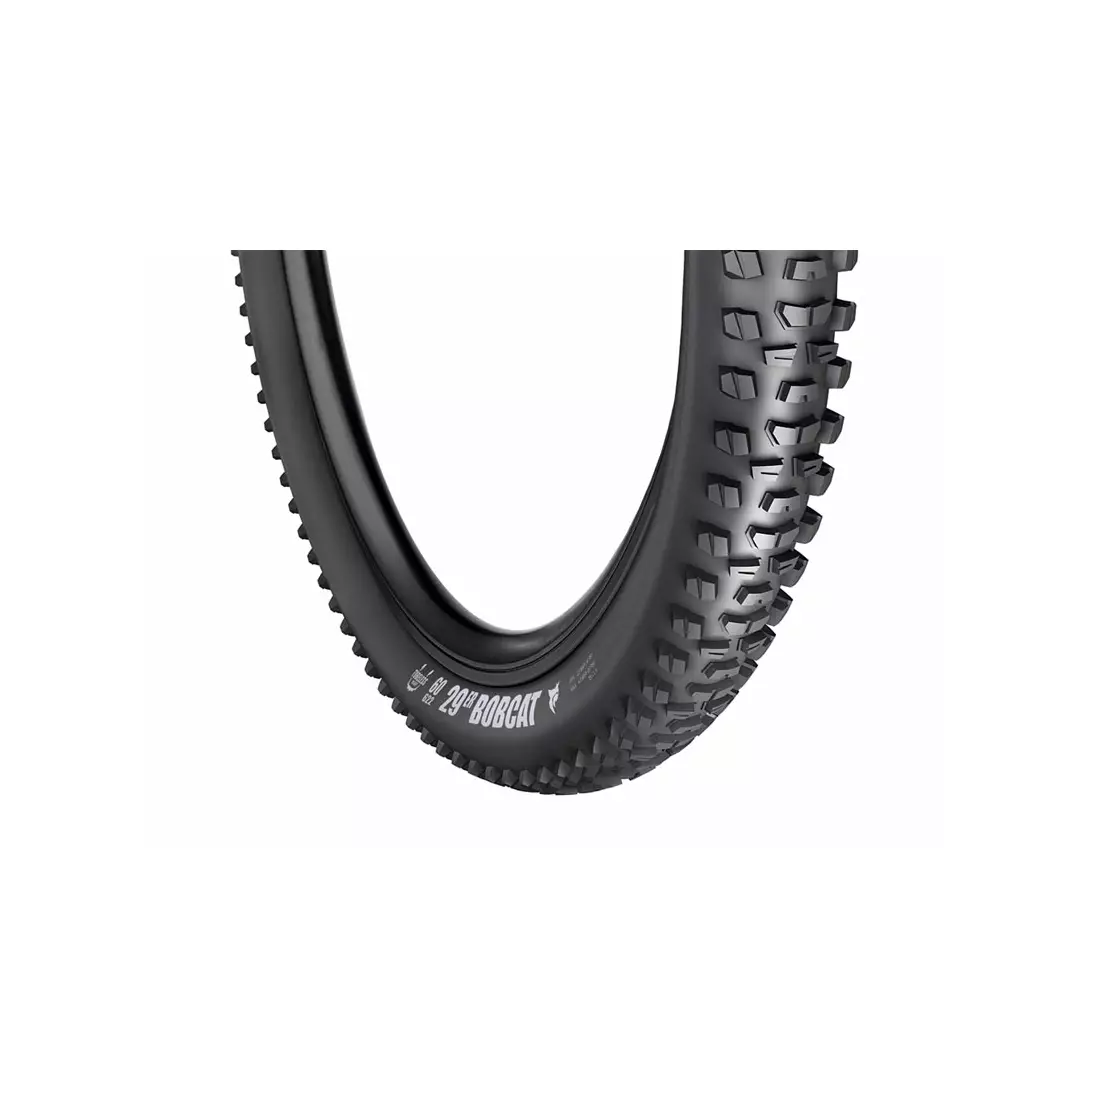 VREDESTEIN bicycle tire mtb bobcat 29x2.35 (60-622) TPI120 950g coiled black VRD-29251